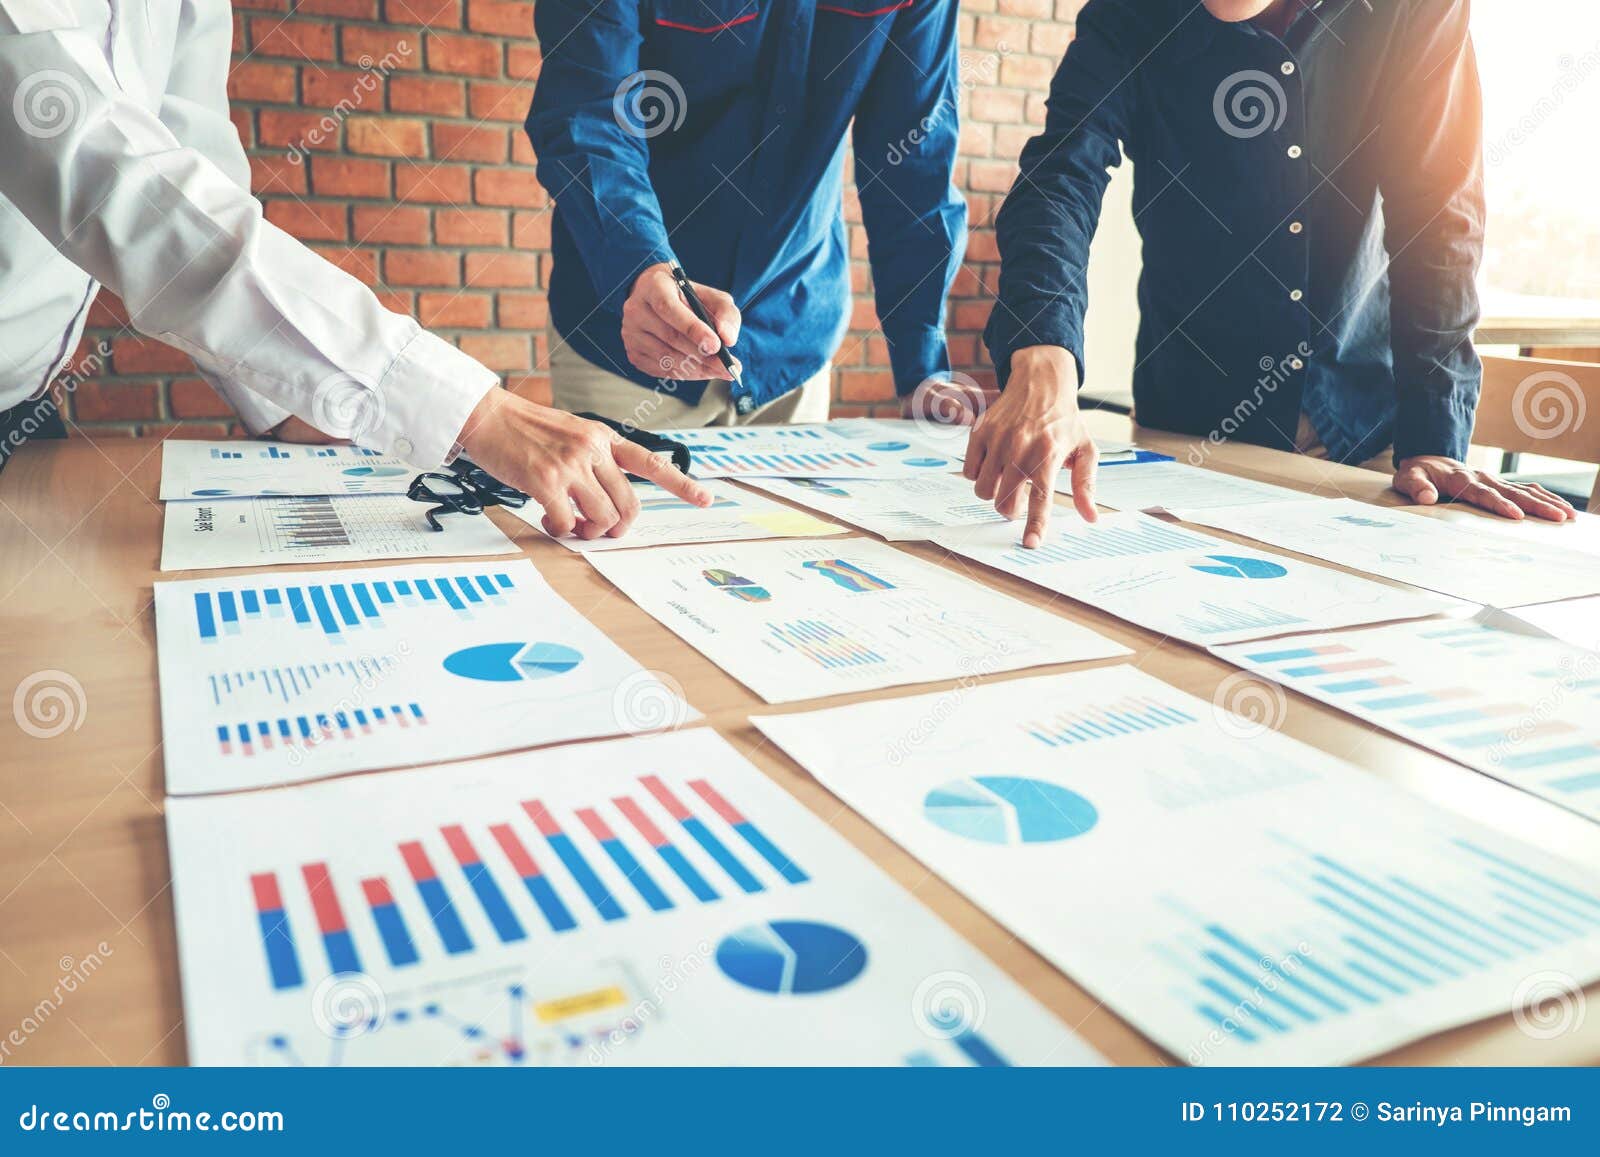 business people meeting planning strategy analysis concept